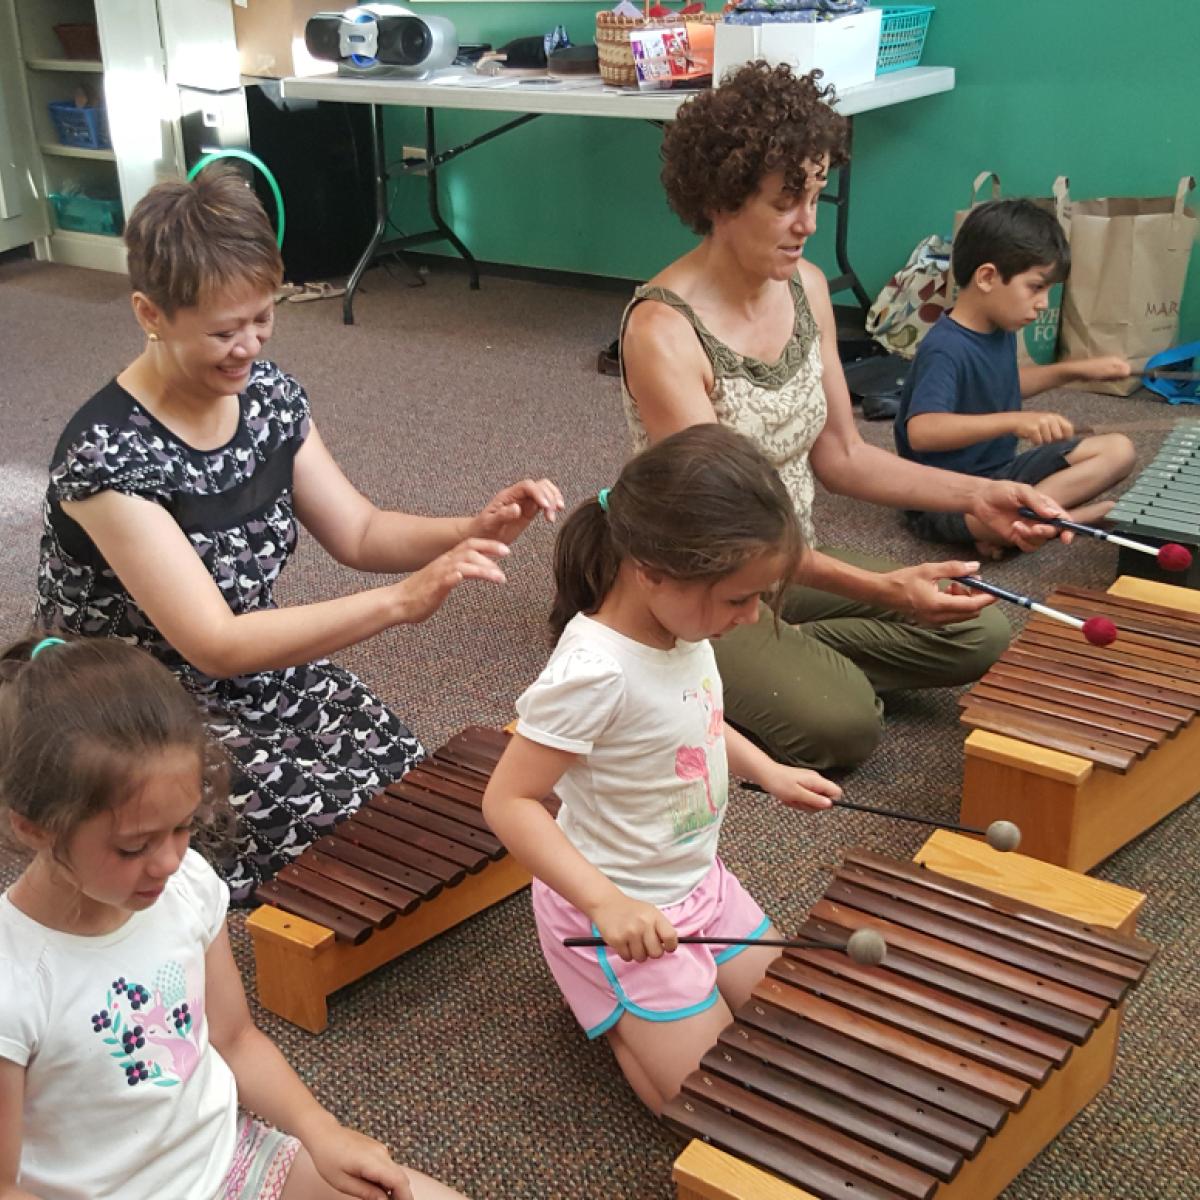 Musikgarten Class at the Music Institute of Chicago